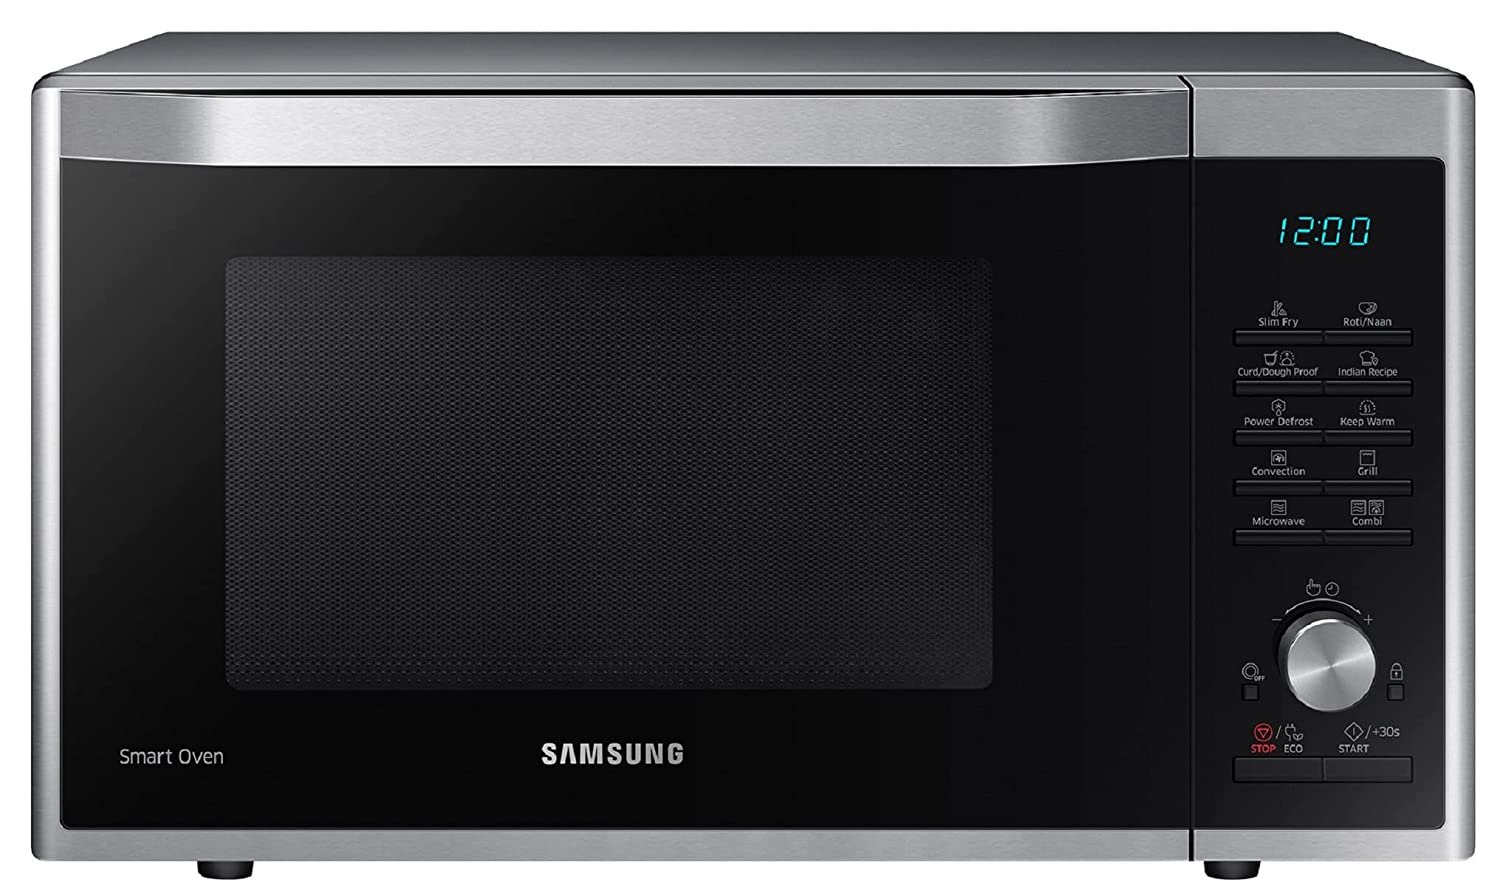 Samsung 32 L Convection Microwave Oven